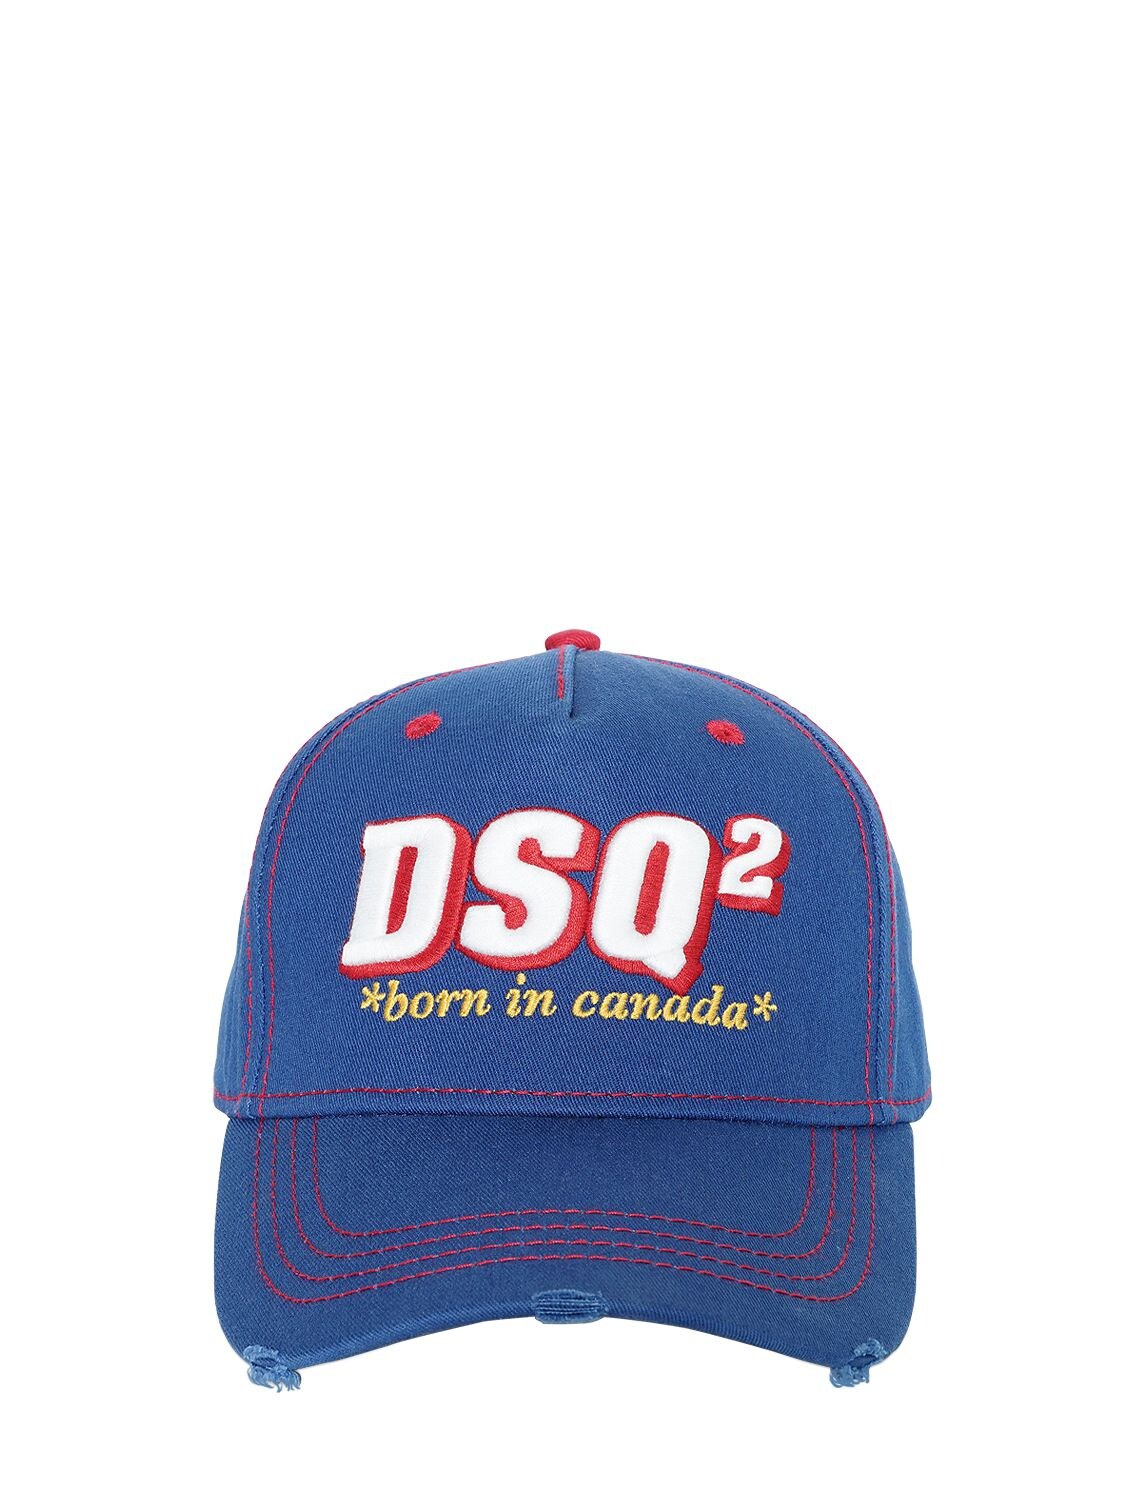 Dsquared2 Dsq2 Embroidered Canvas Baseball Hat In Blue